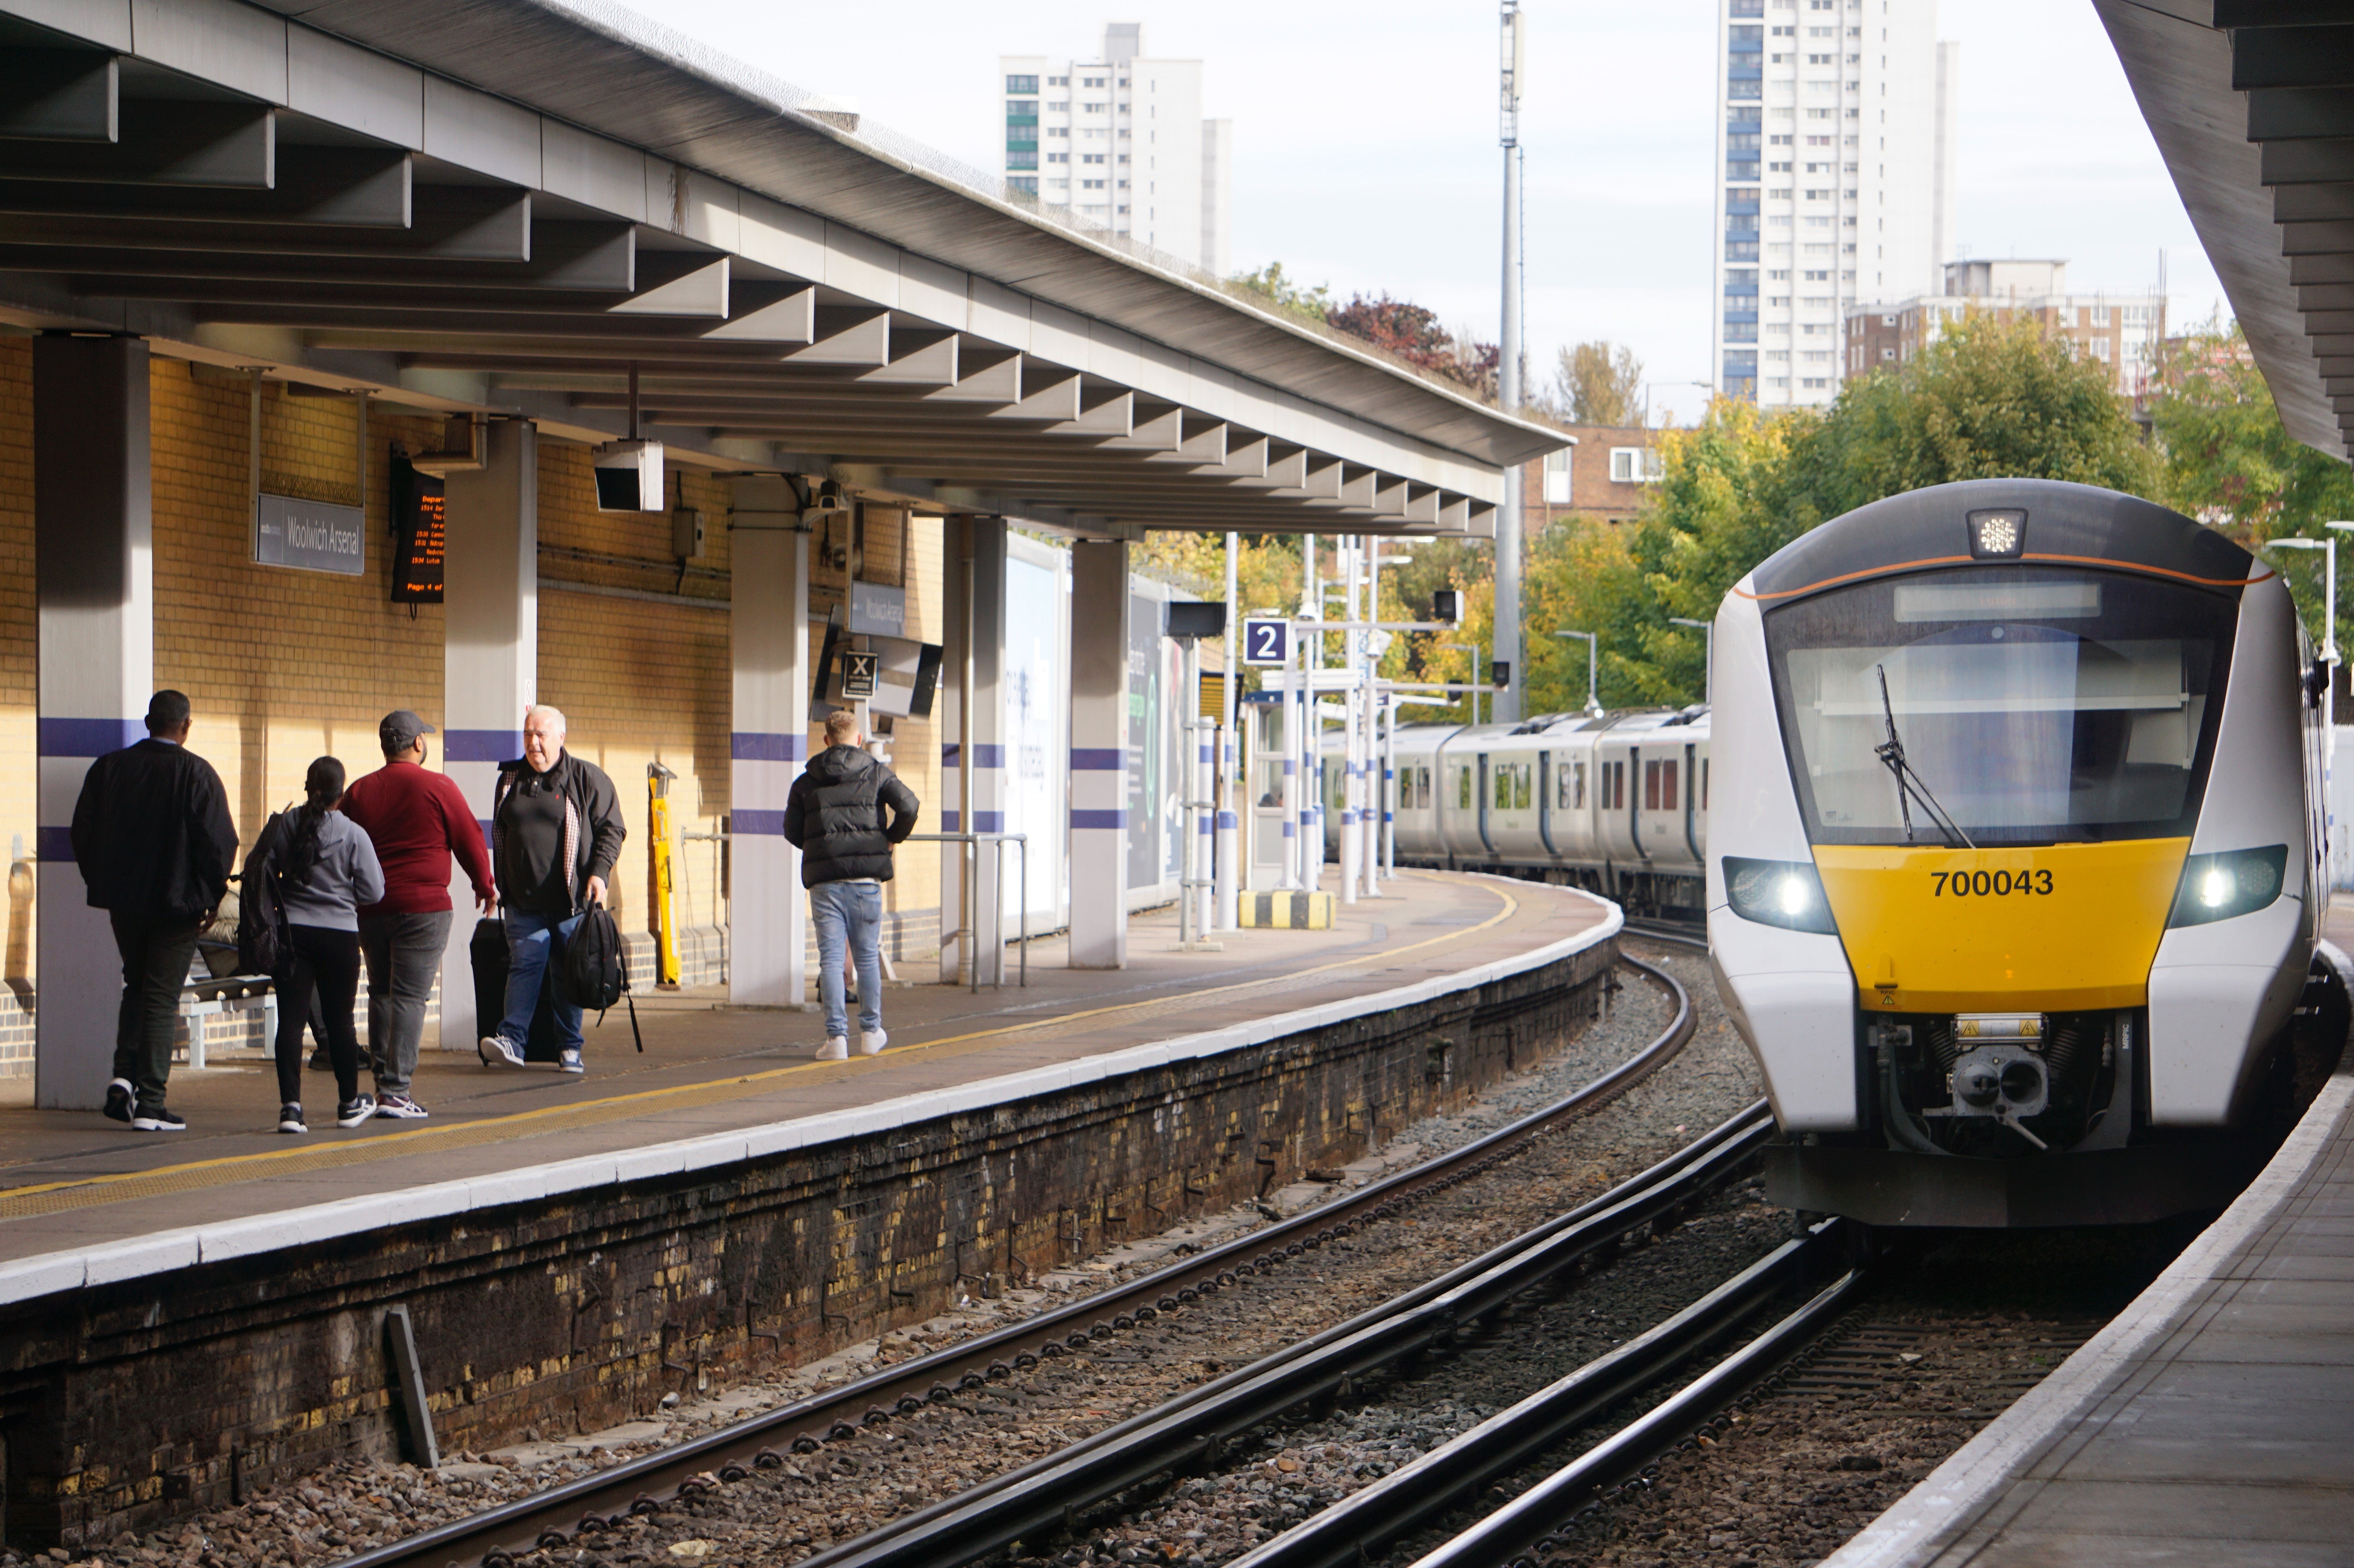 Constant wrangling leaves rail users with little hope for a better future